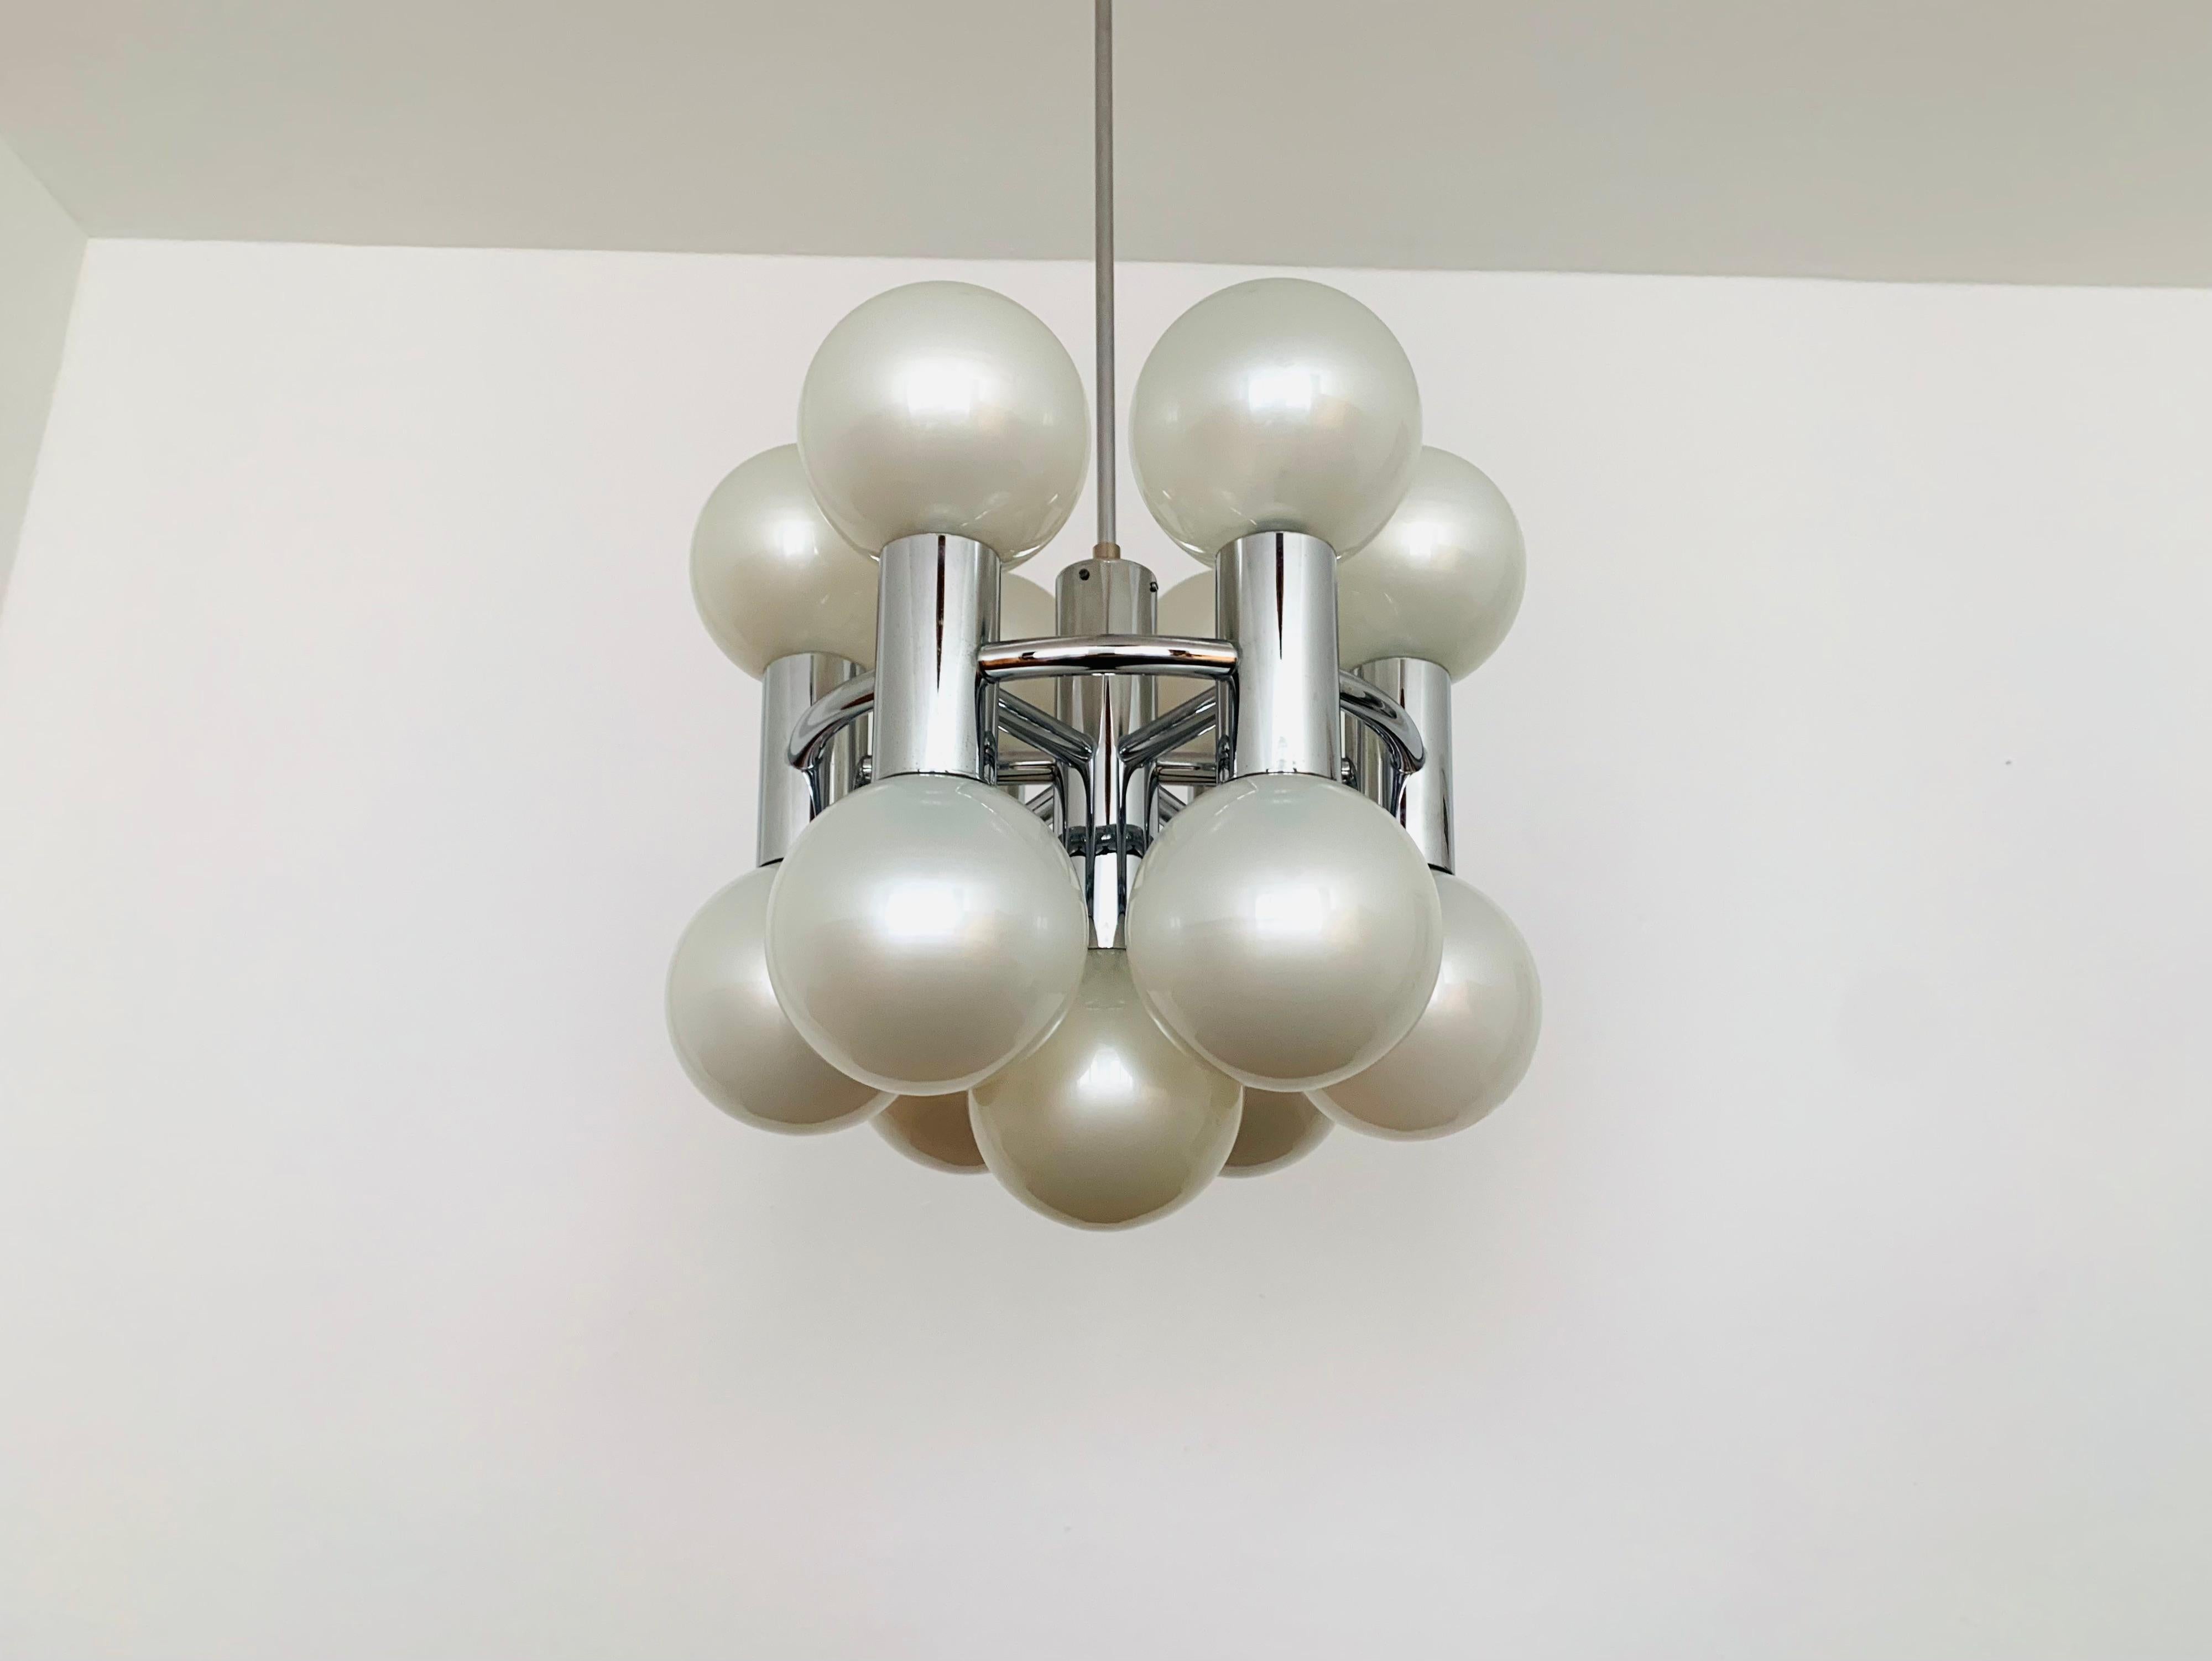 Extremely impressive Sputnik chandelier from the 1970s.
Extraordinary design and a real eye-catcher for every room.
The lighting effect of the lamp is extremely beautiful.
Very high quality processing.
This version with the mother of pearl colored